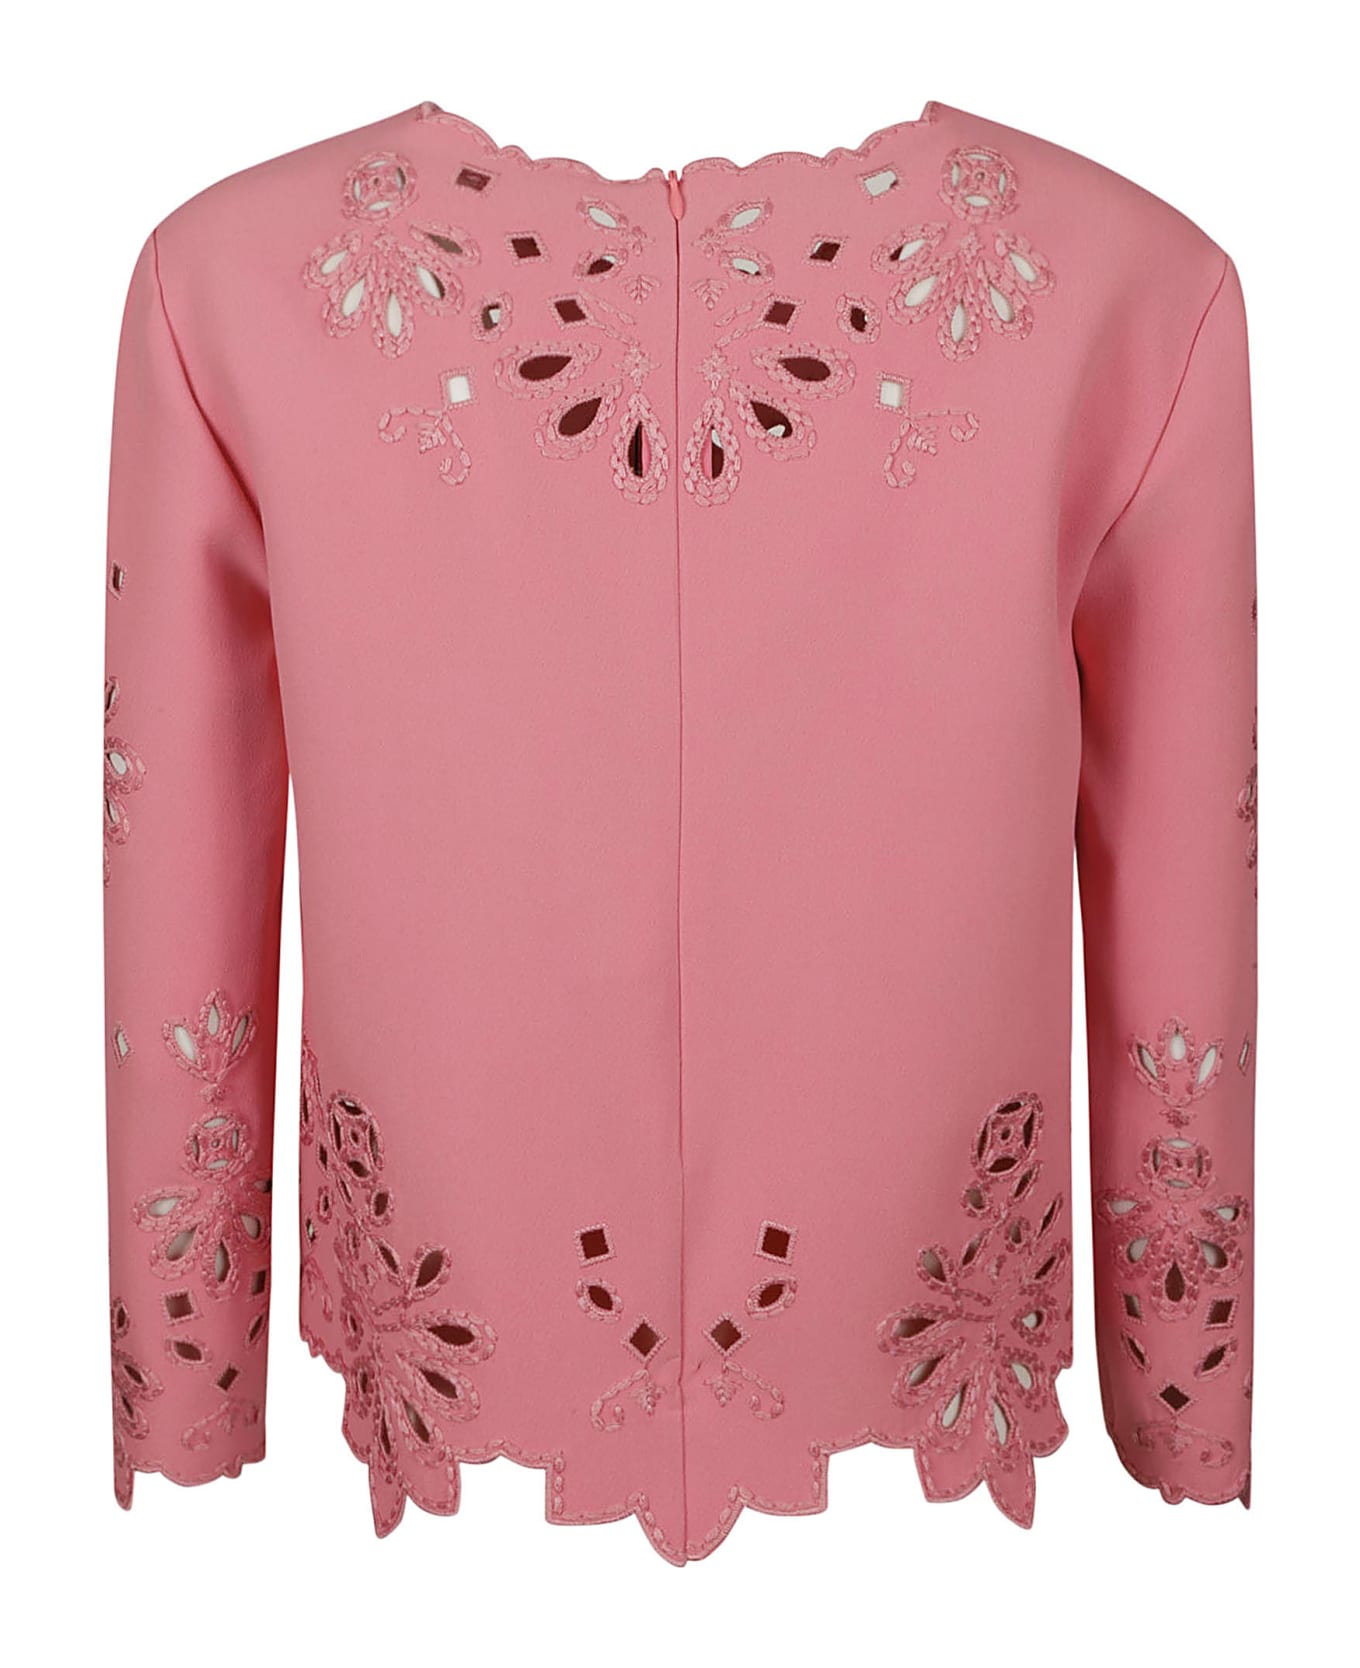 Ermanno Scervino Floral Detail Blouse - Pink ブラウス